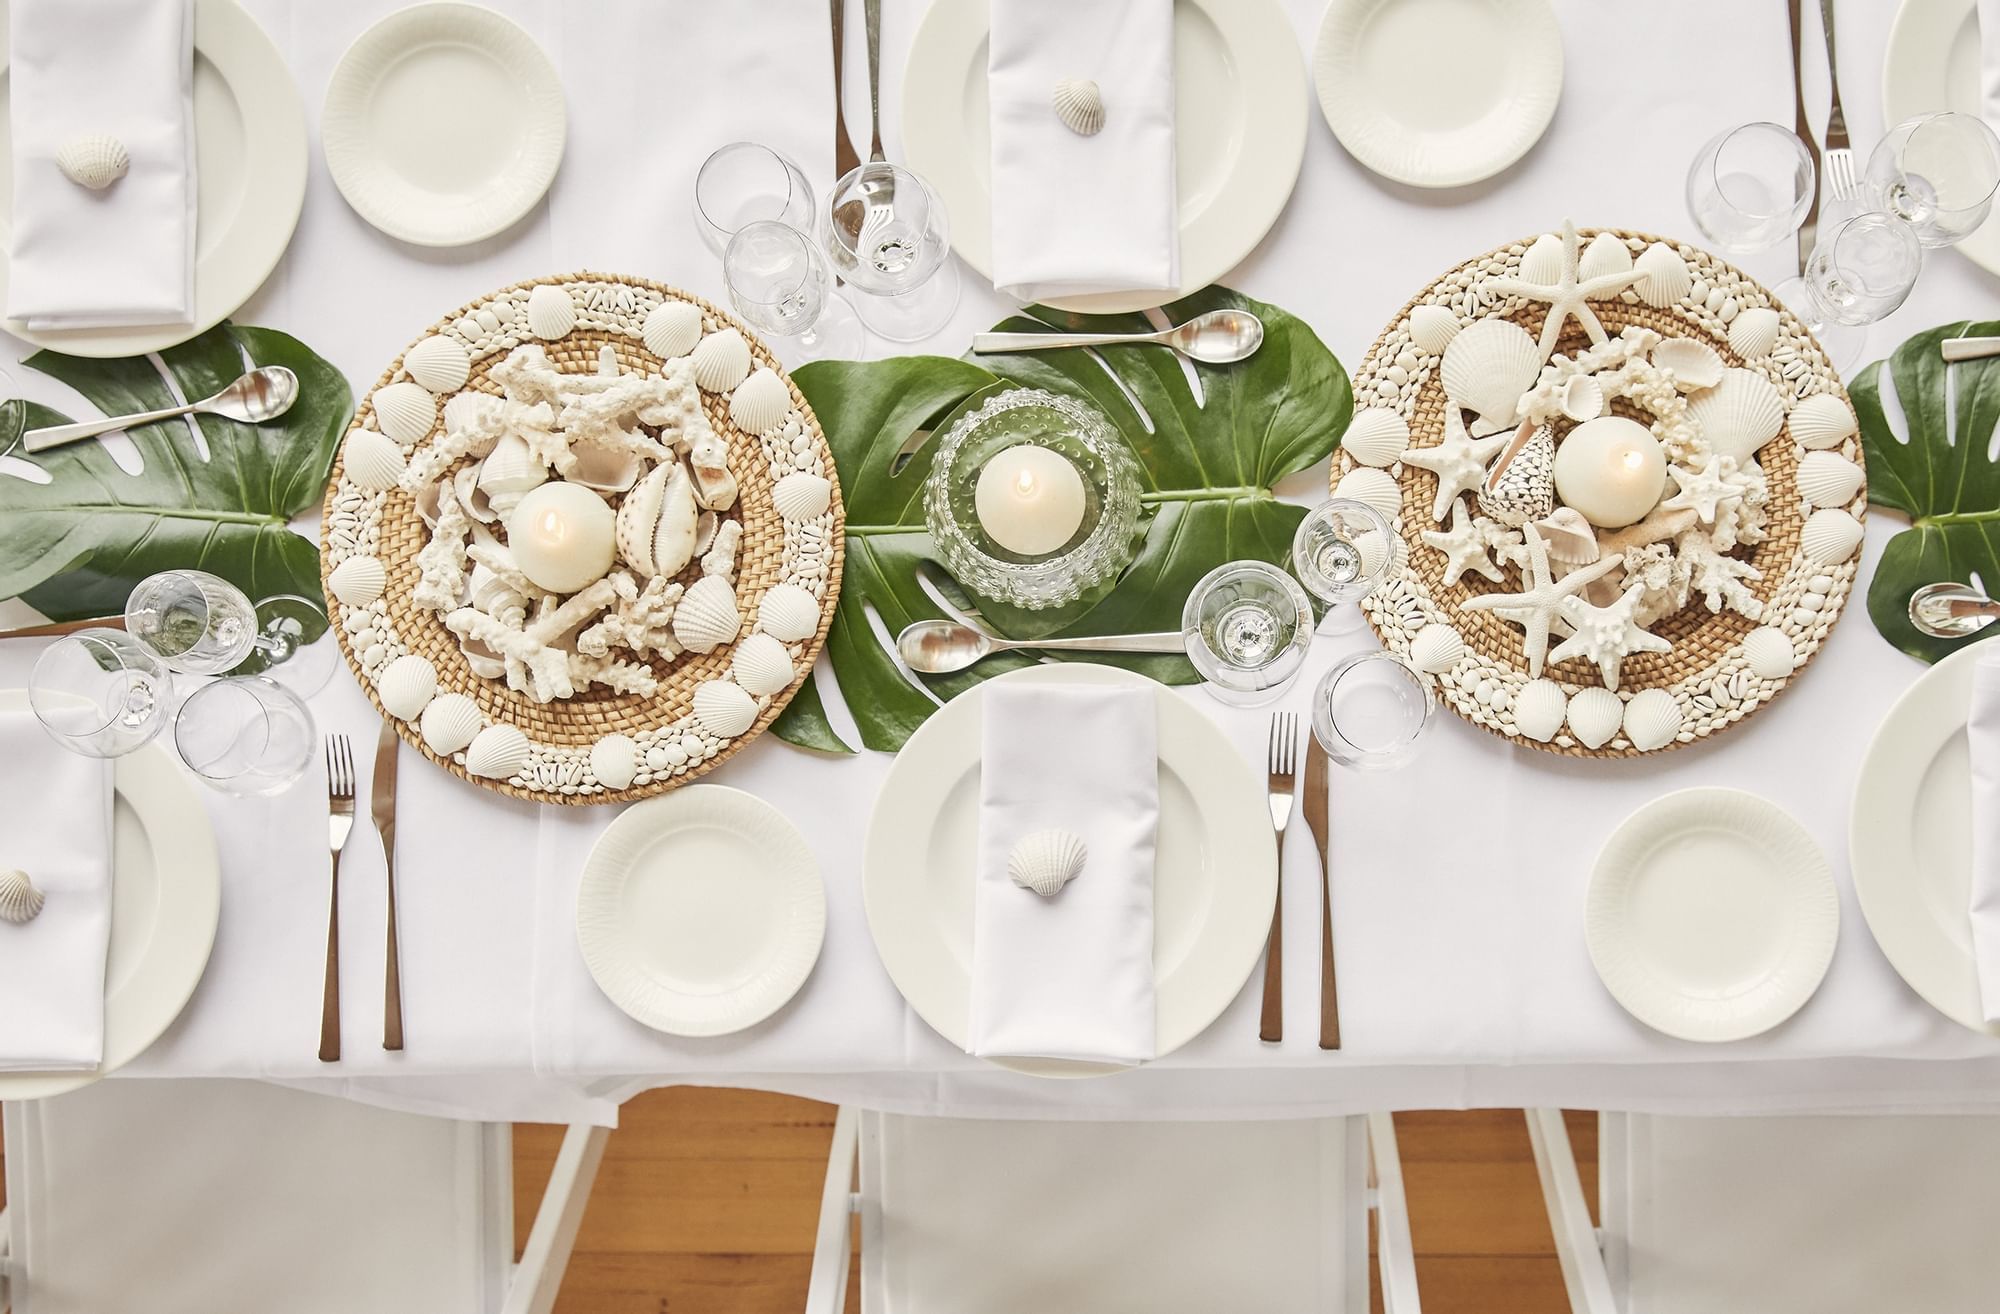 Table decors with seashells at Daydream Island Resort